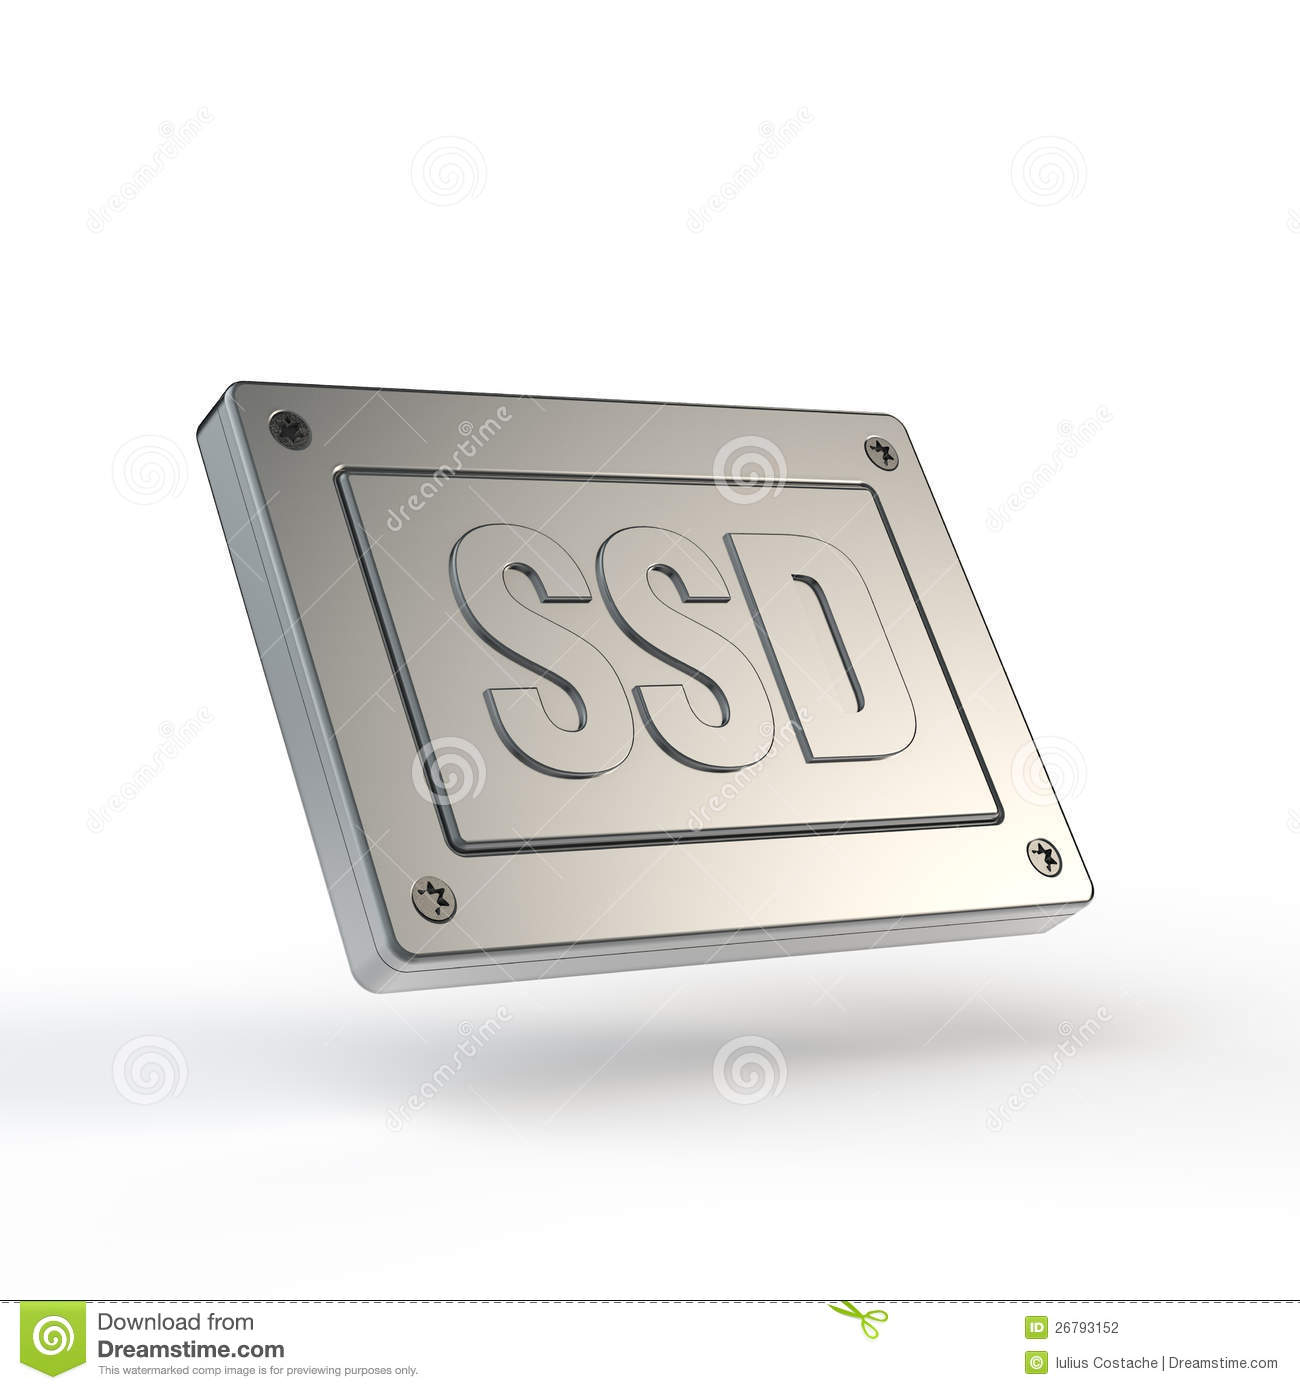 Solid State Drive  Ssd  Stock Photography   Image  26793152